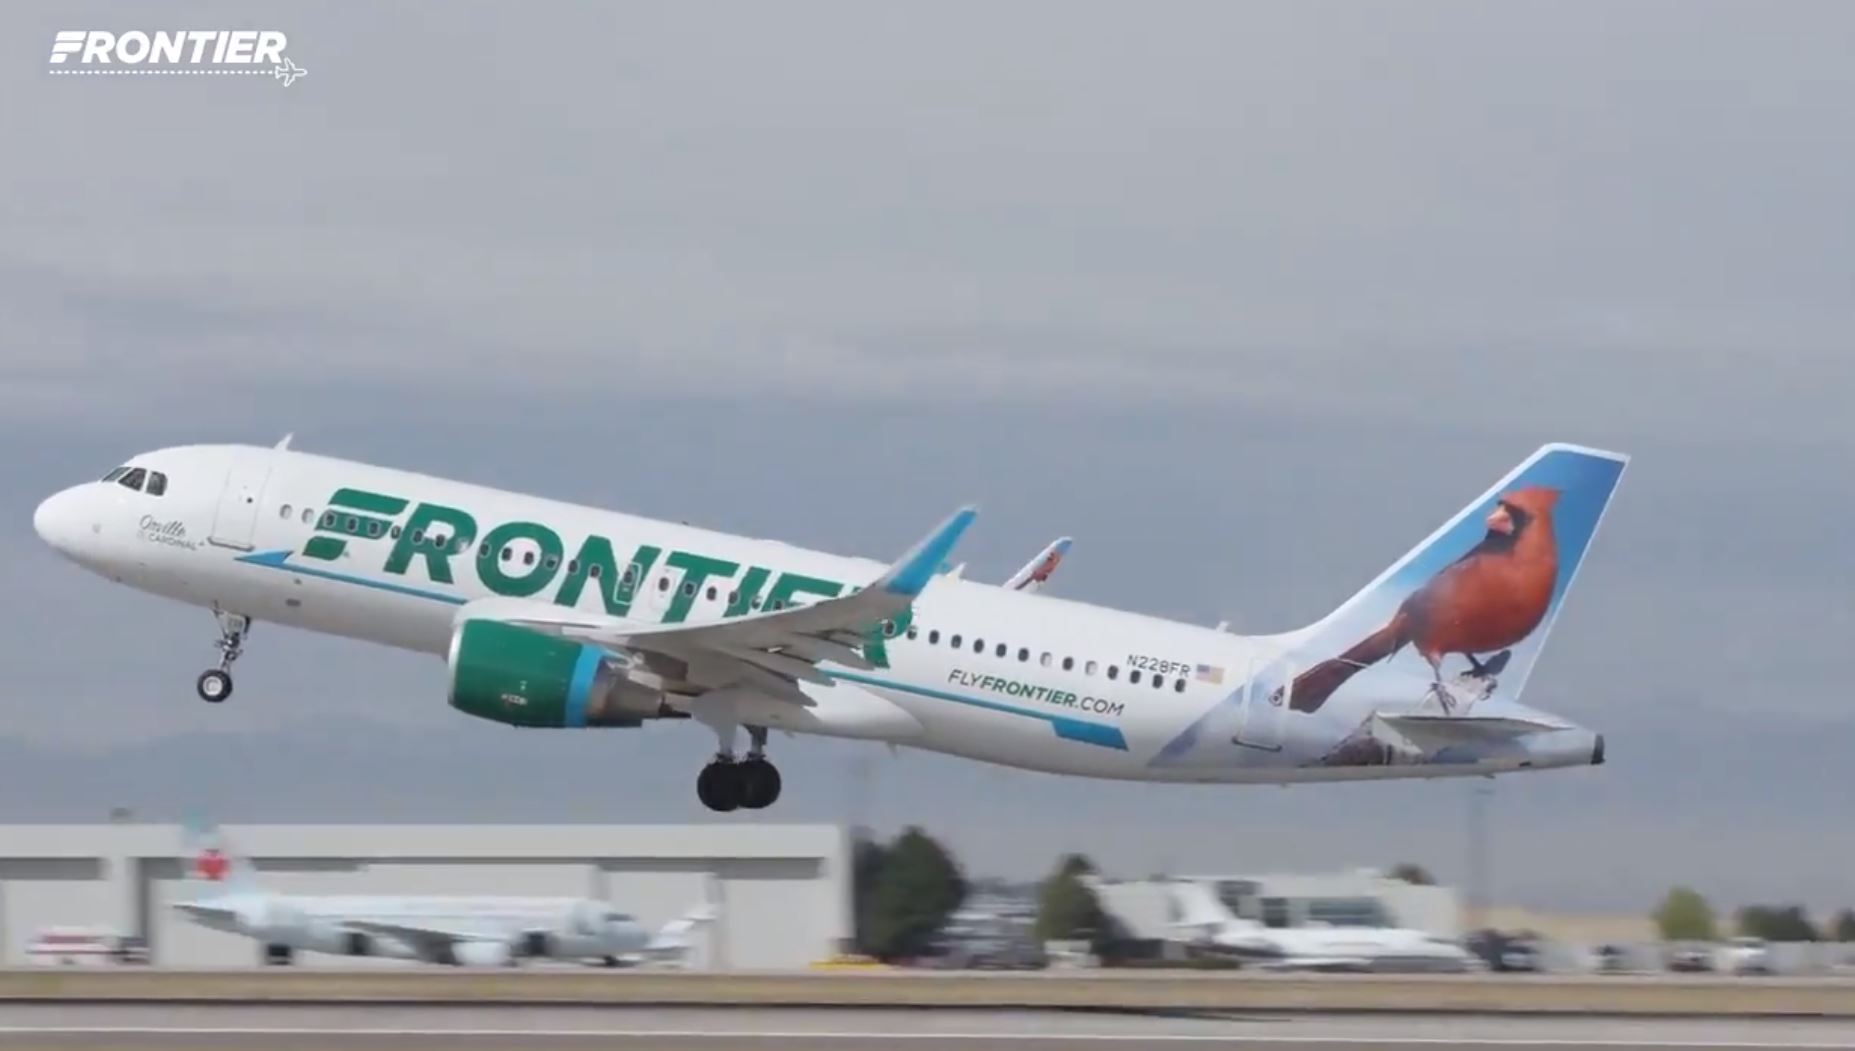 Frontier, a low cost airline from the United States, will launch operations in Guatemala on April 12 – Free Press